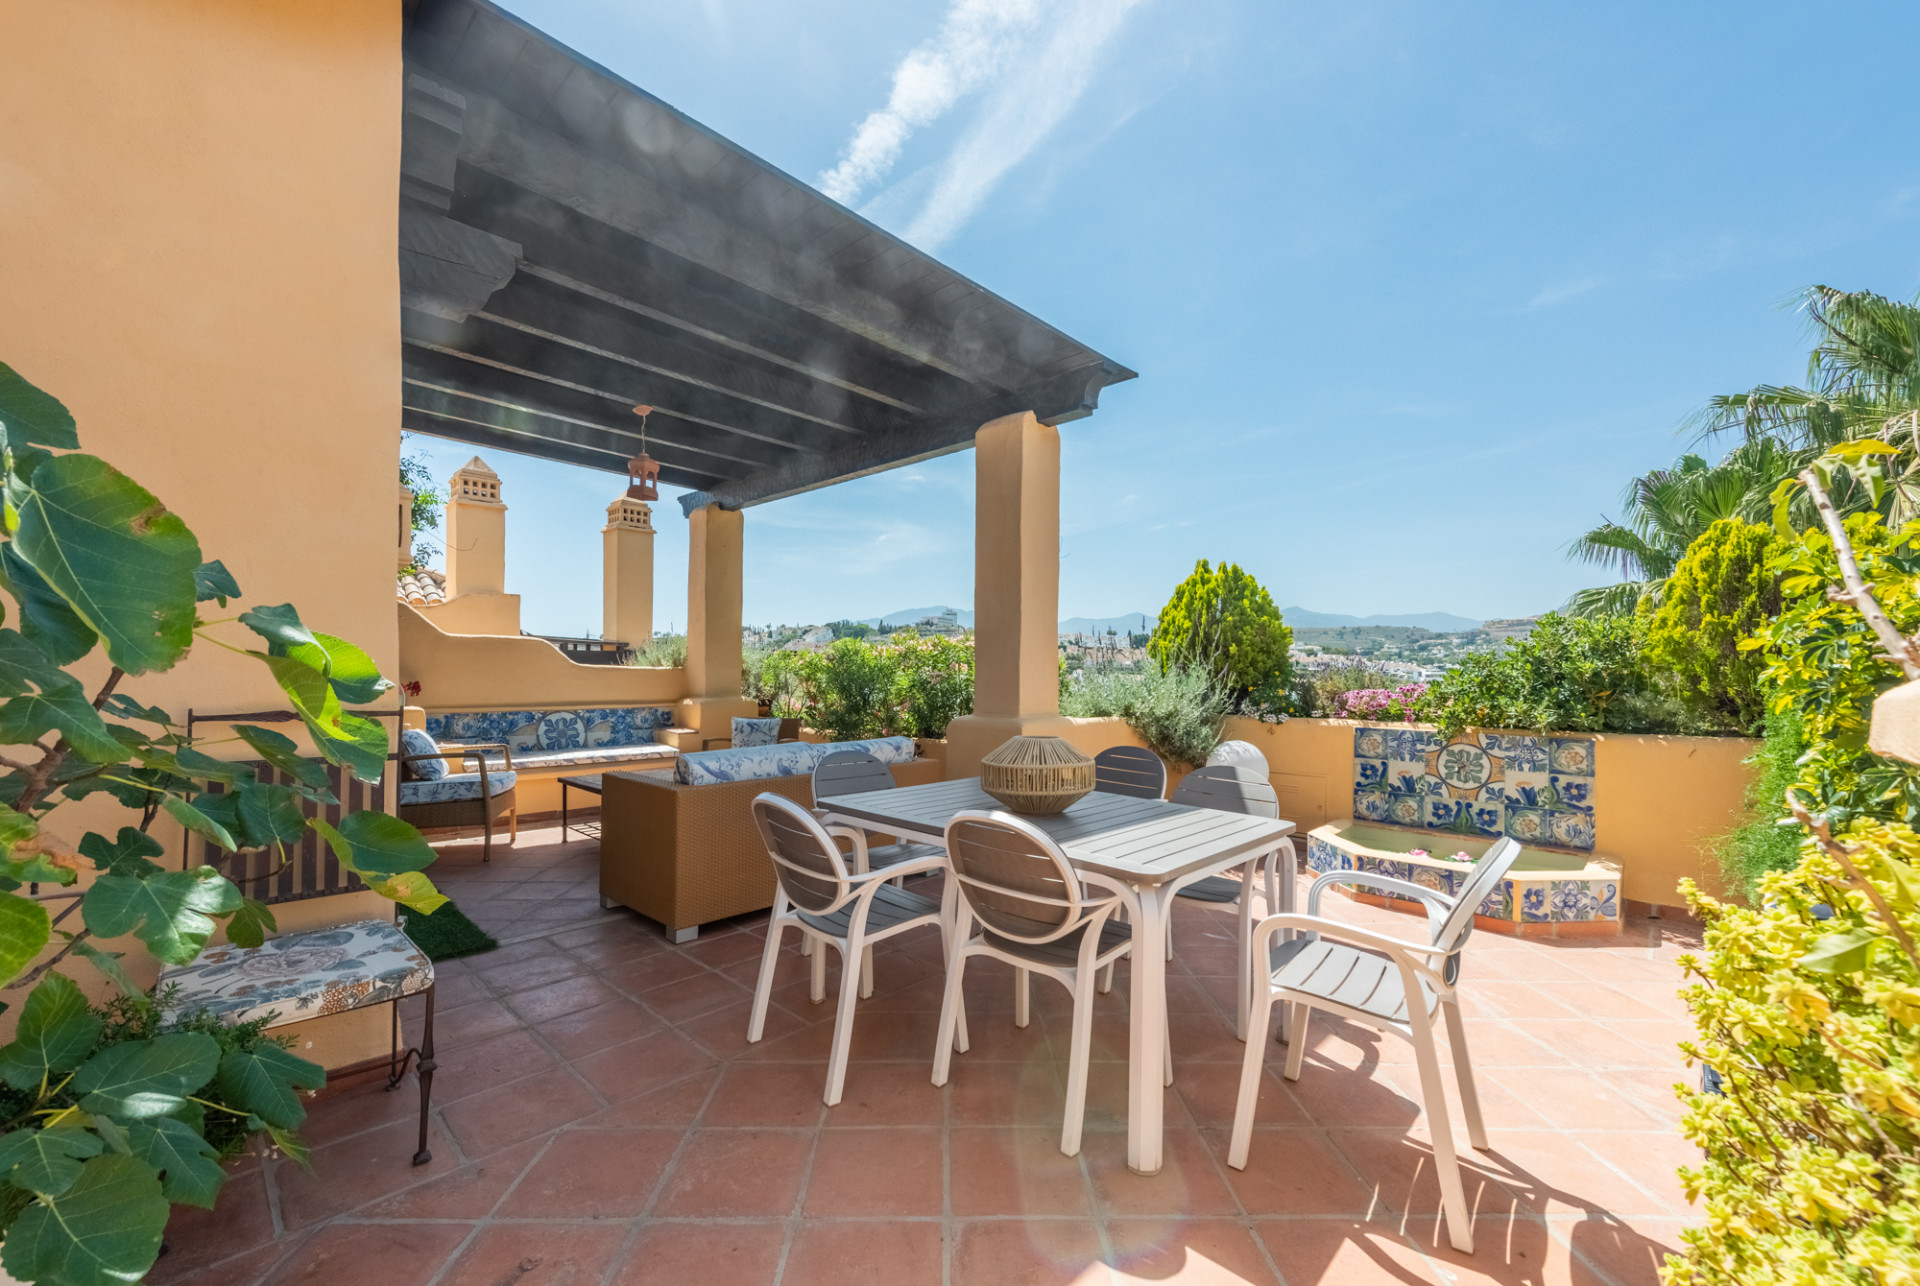 Amazing penthouse in El Campanario, with sea views and oasis-style terraces!